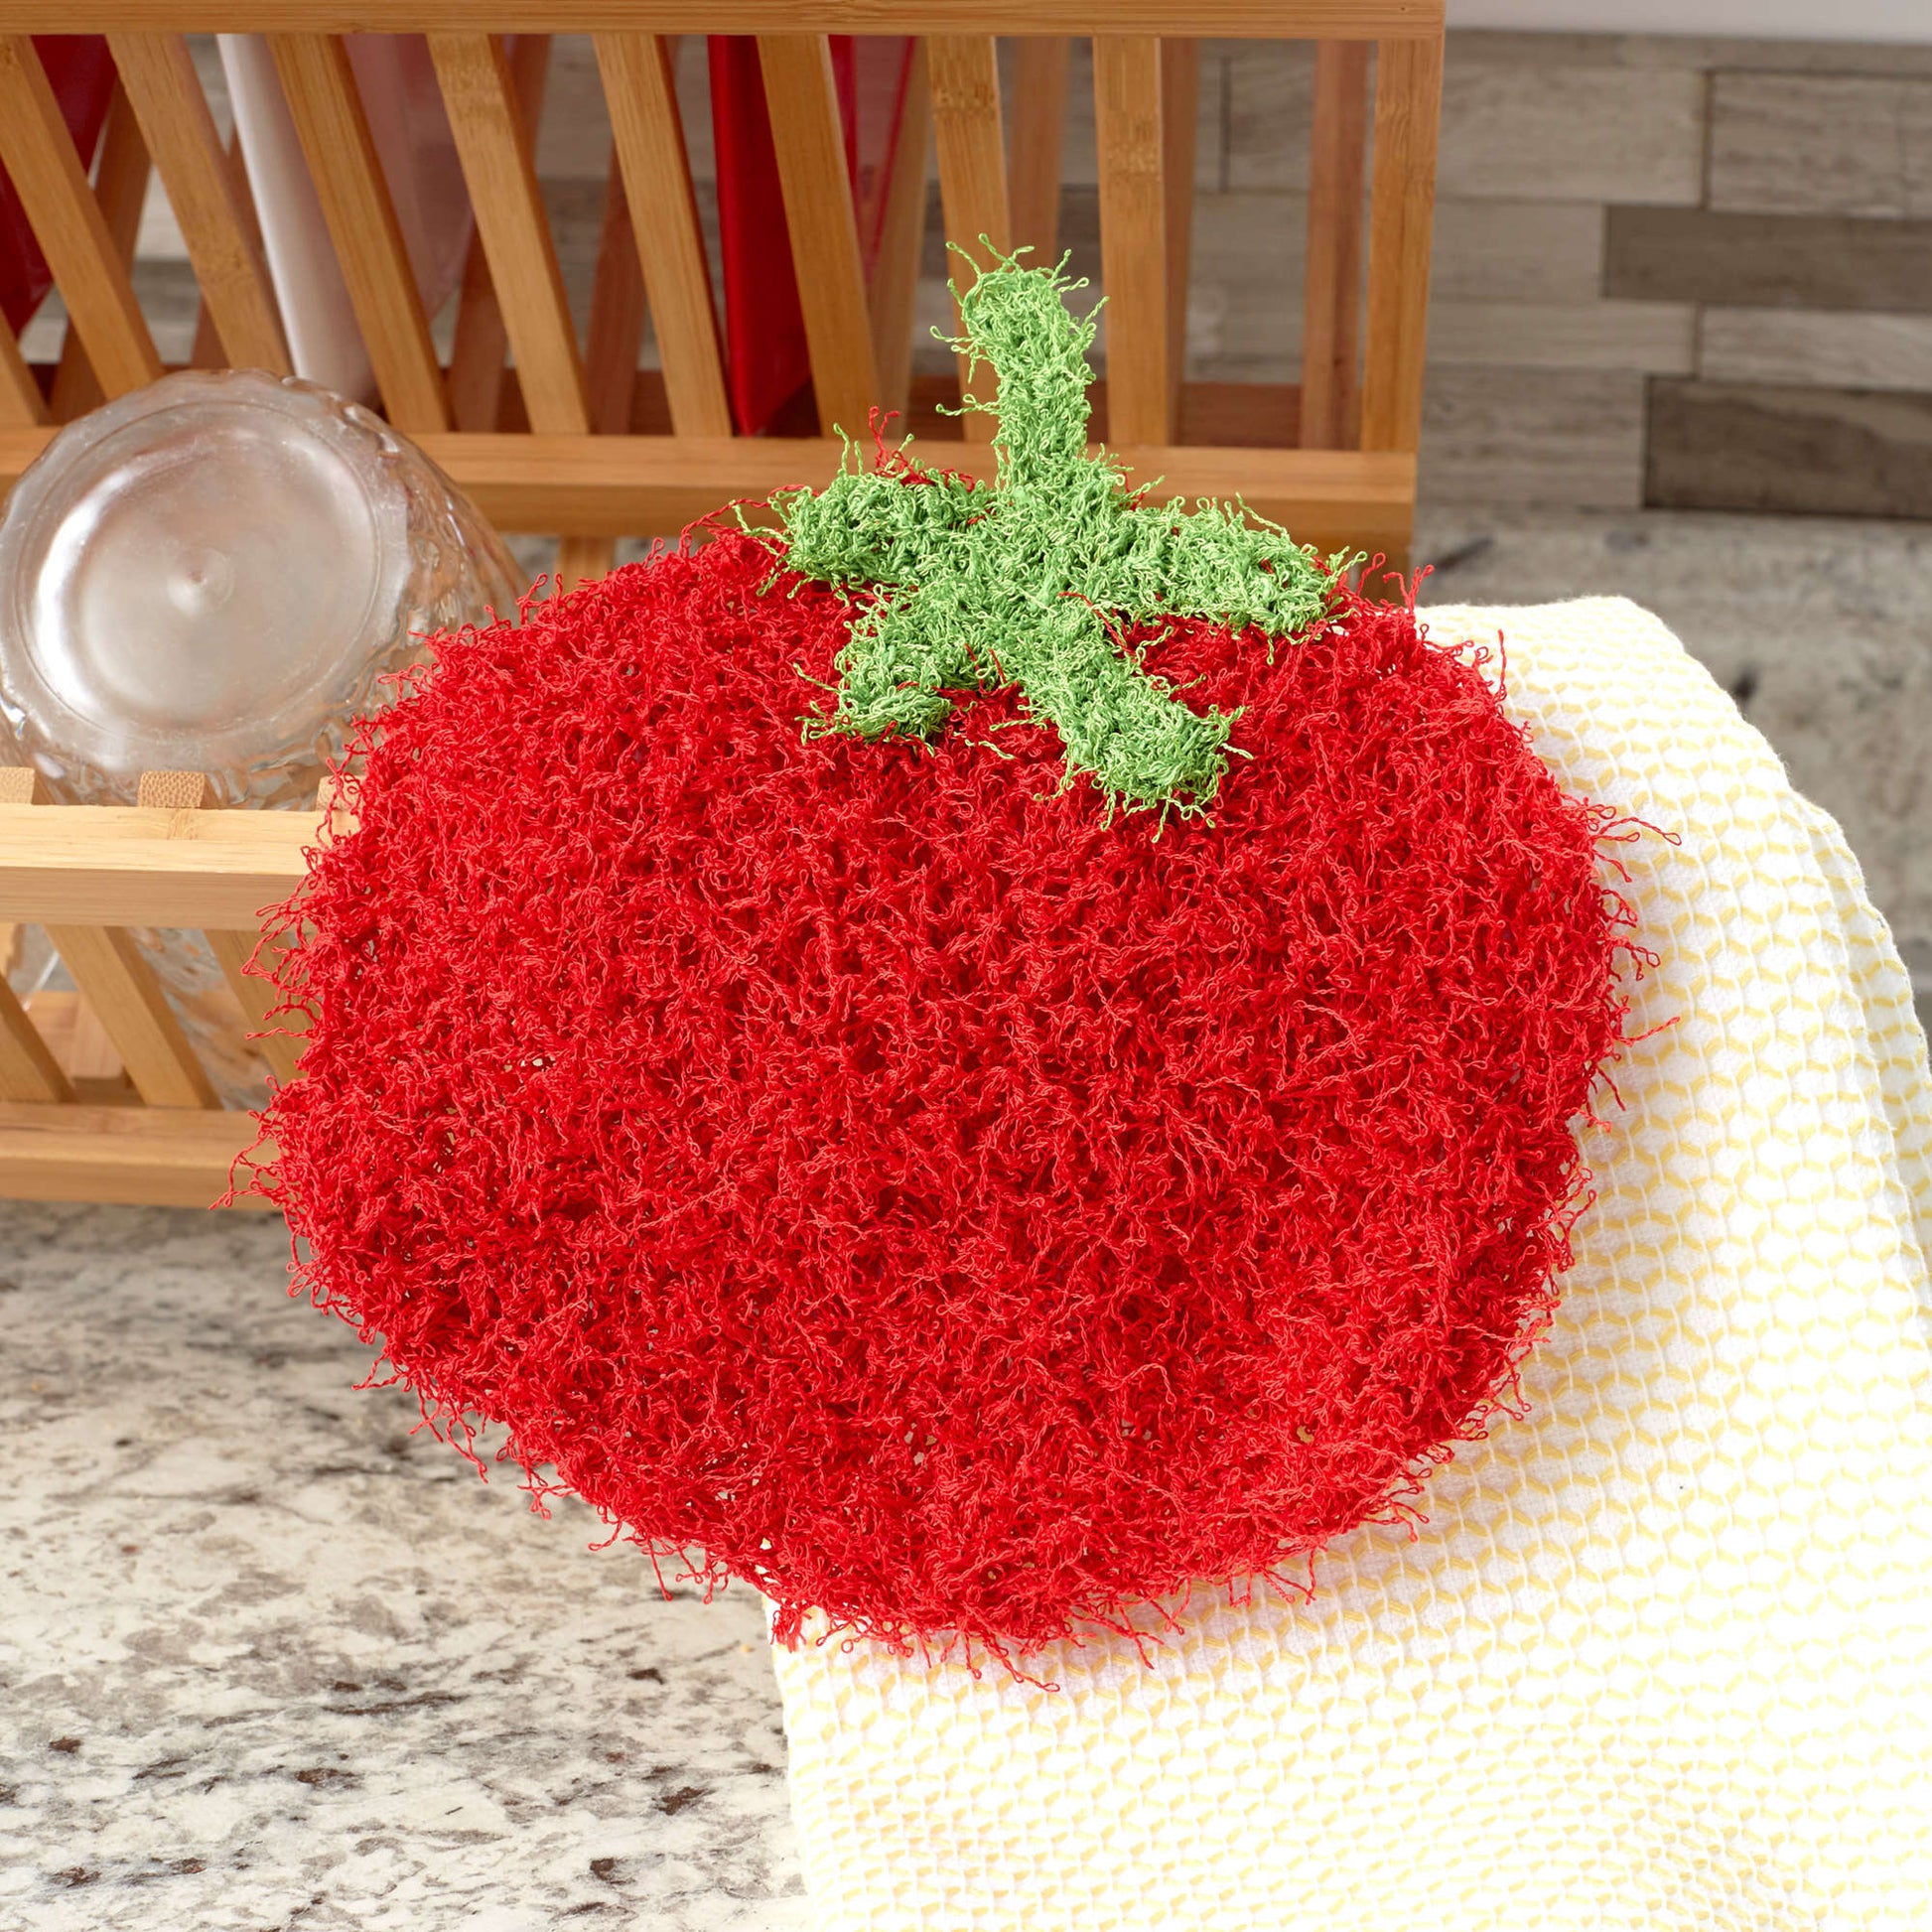 Free Red Heart Tomato Scrubby Pattern